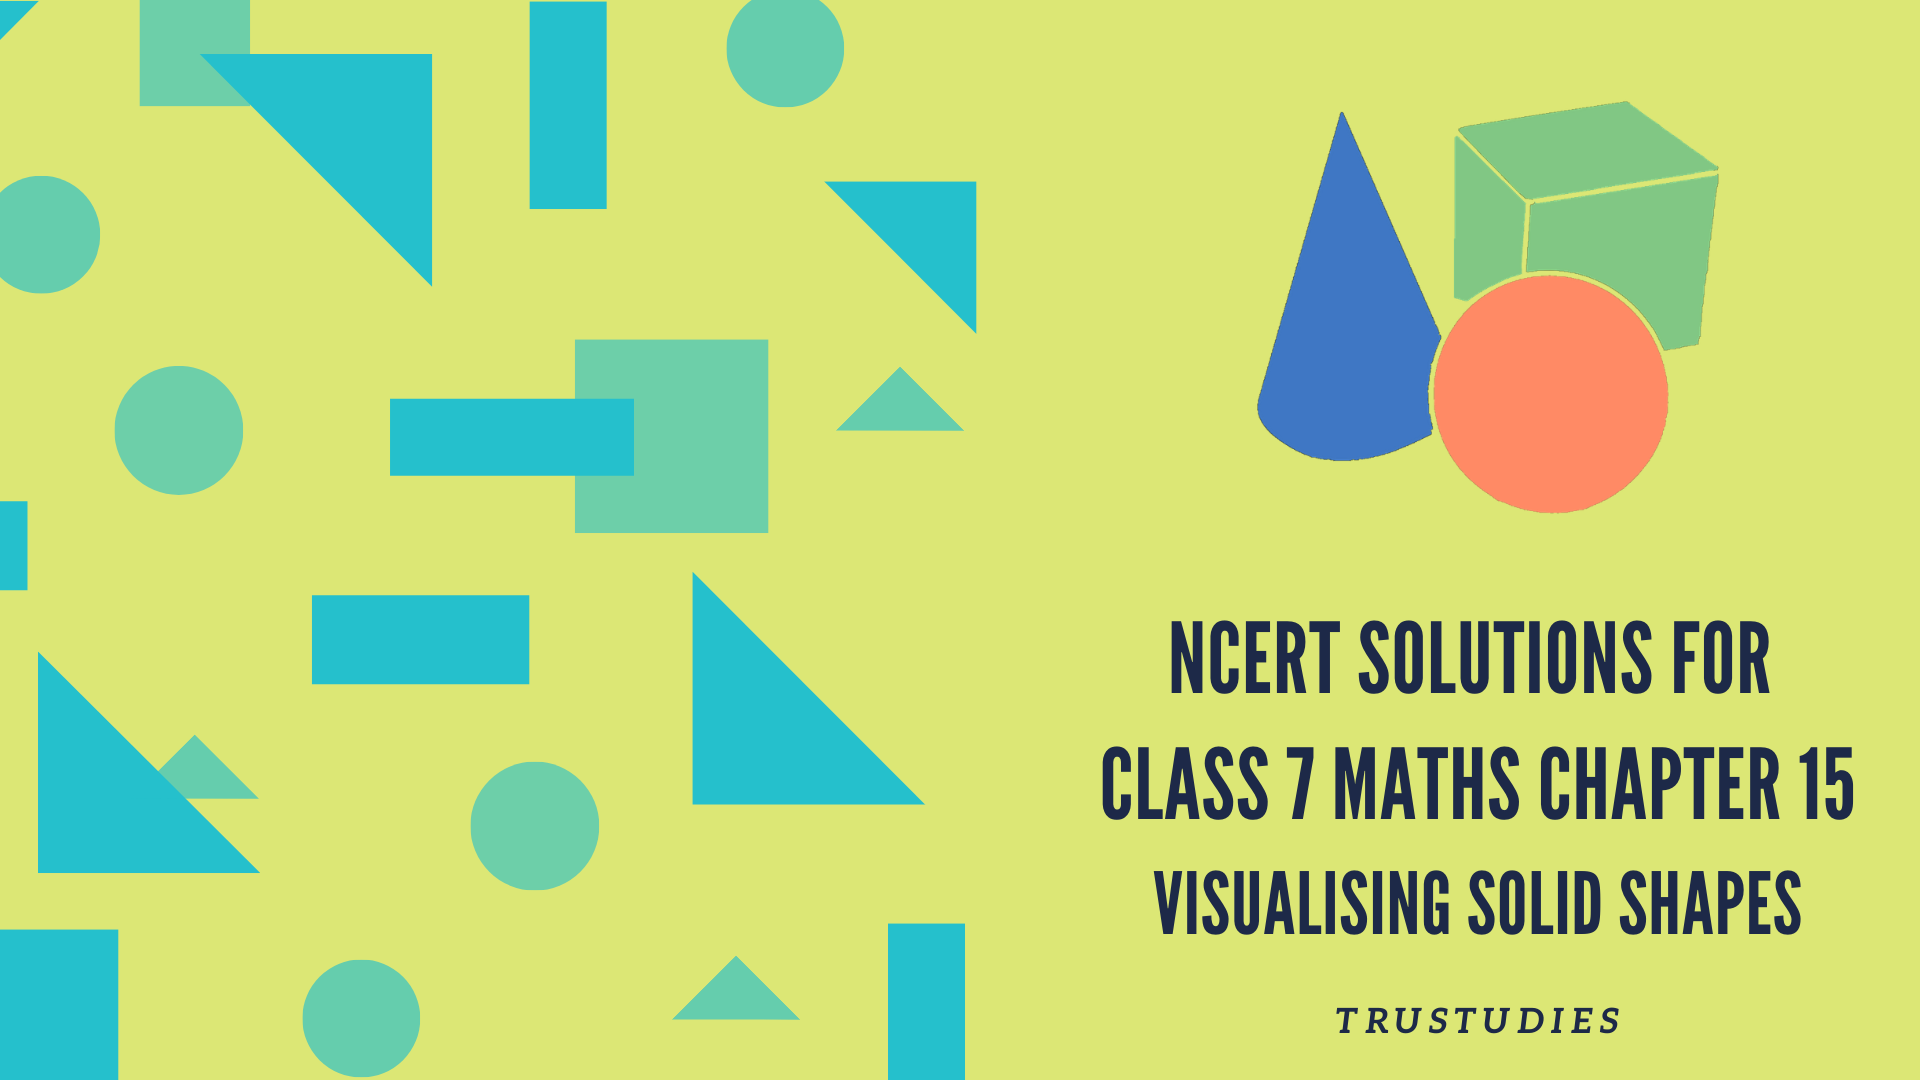 NCERT solutions for class 7 maths chapter 15 visualising solid shapes banner image